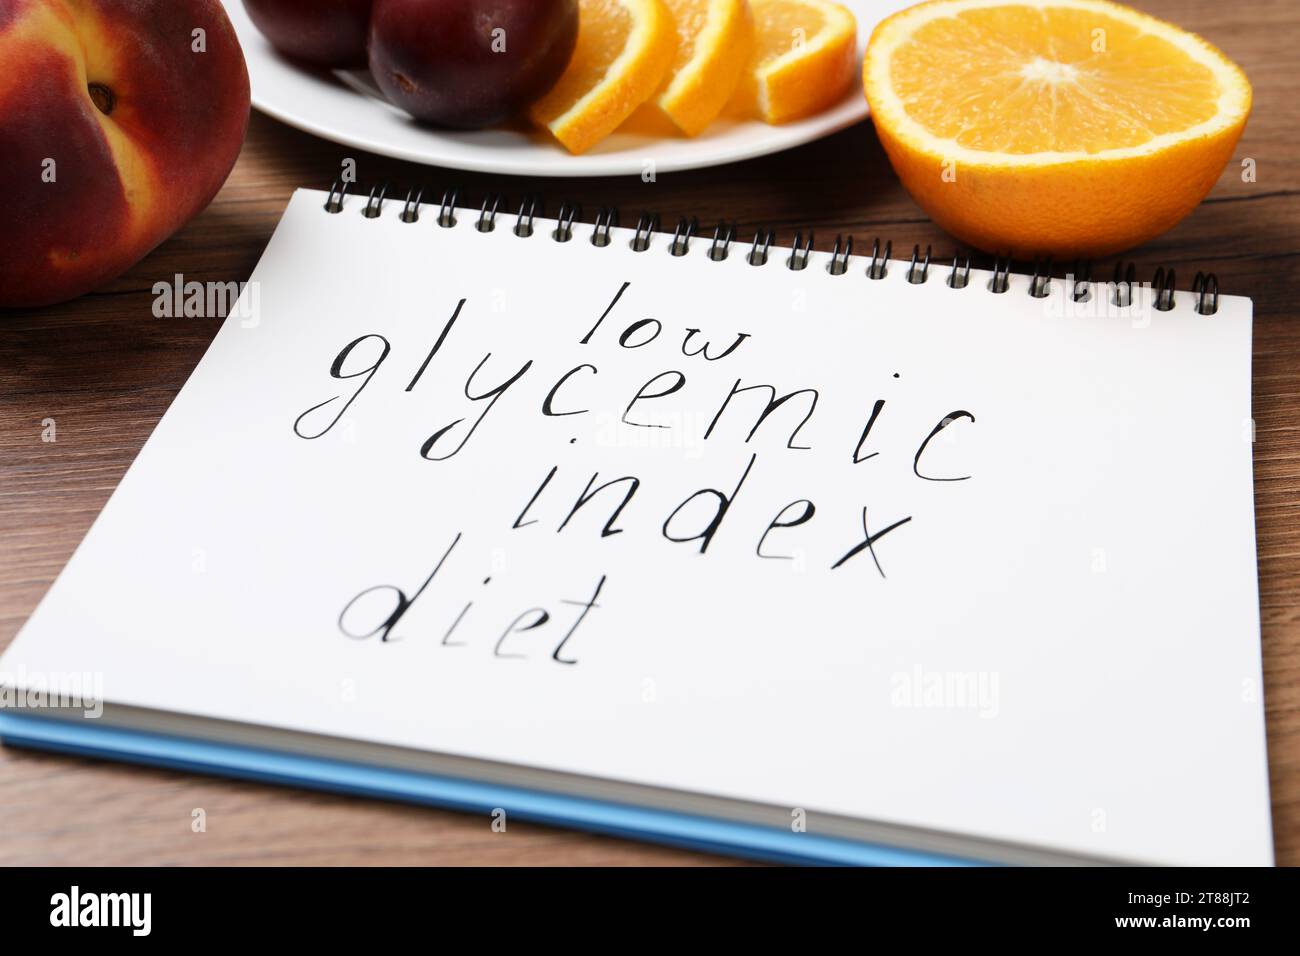 Notebook with words Low Glycemic Index Diet and fresh fruits on wooden table, closeup Stock Photo